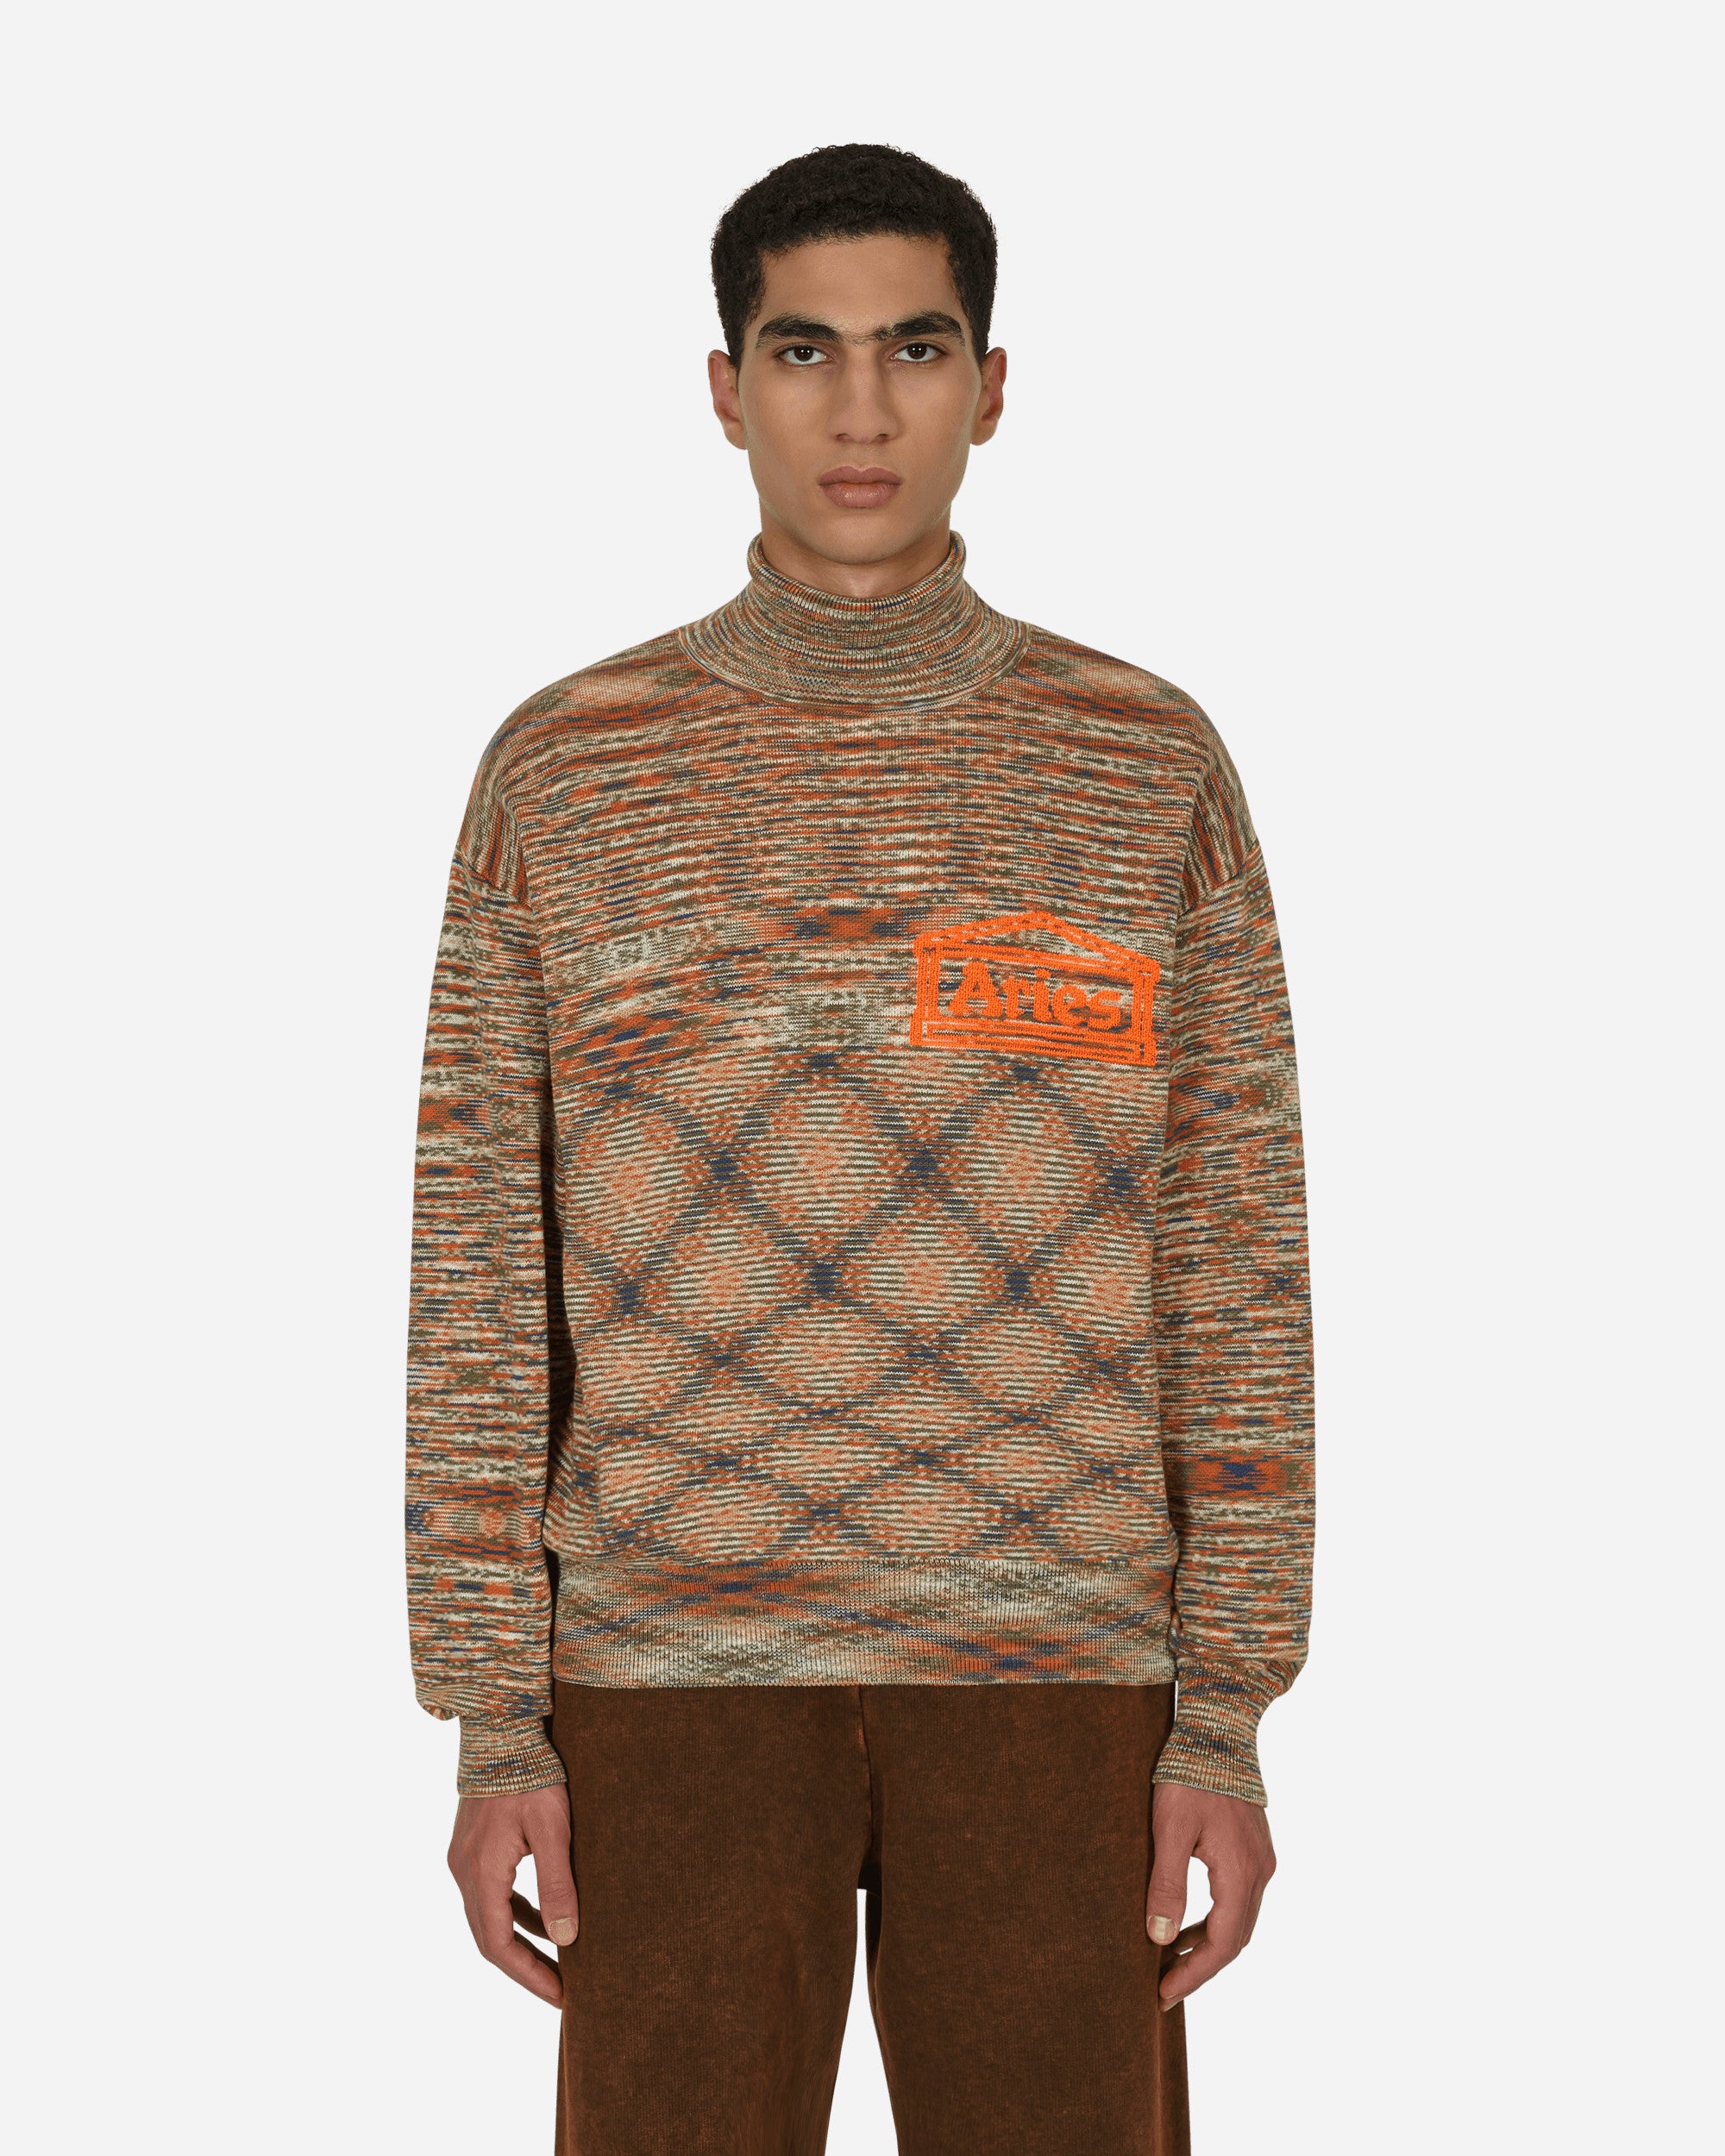 Aries Men's Henge Intarsia Crew Knit in Multi, Size M | End Clothing